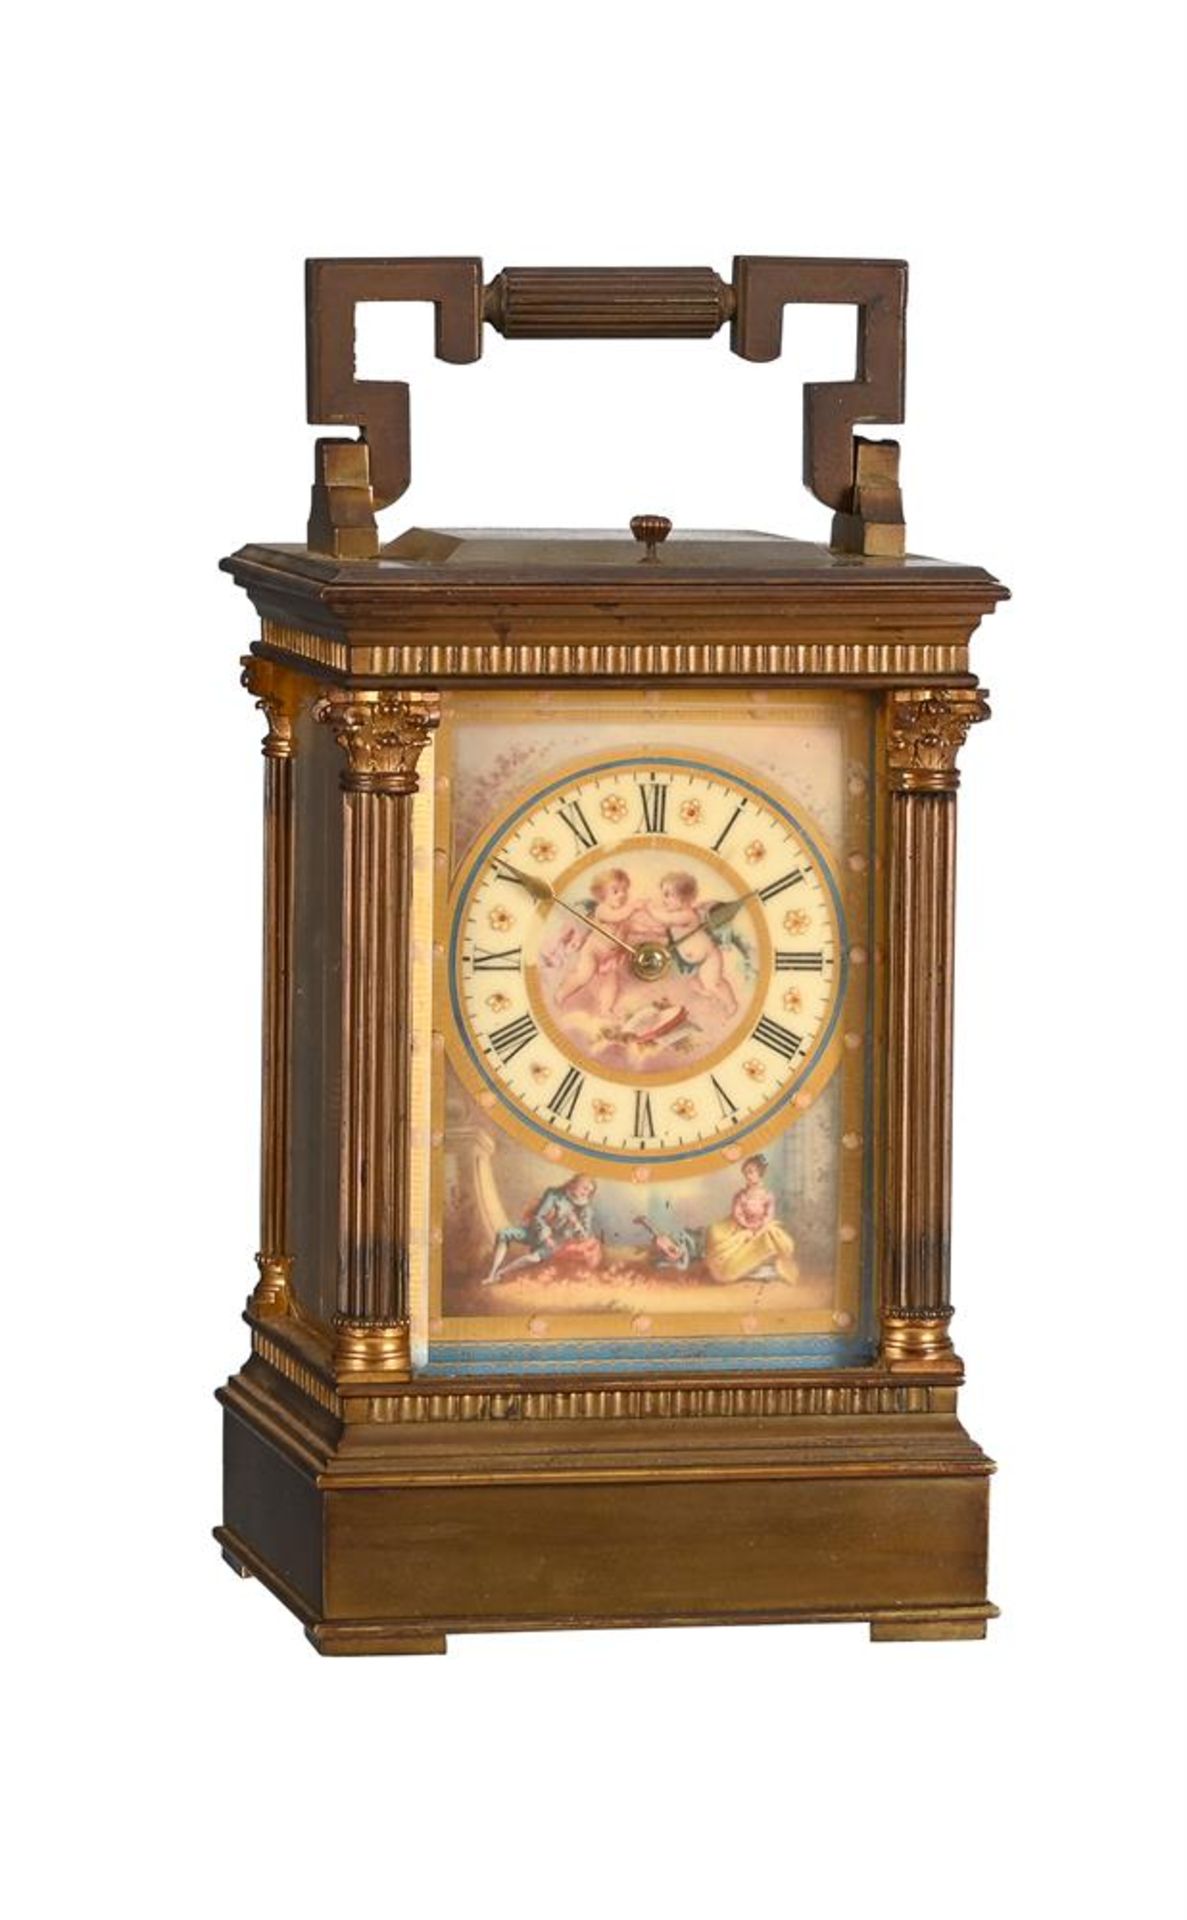 A FRENCH GILT BRASS ANGLAISE RICHE CASED REPEATING CARRIAGE CLOCK WITH PAINTED PORCELAIN DIAL PANEL